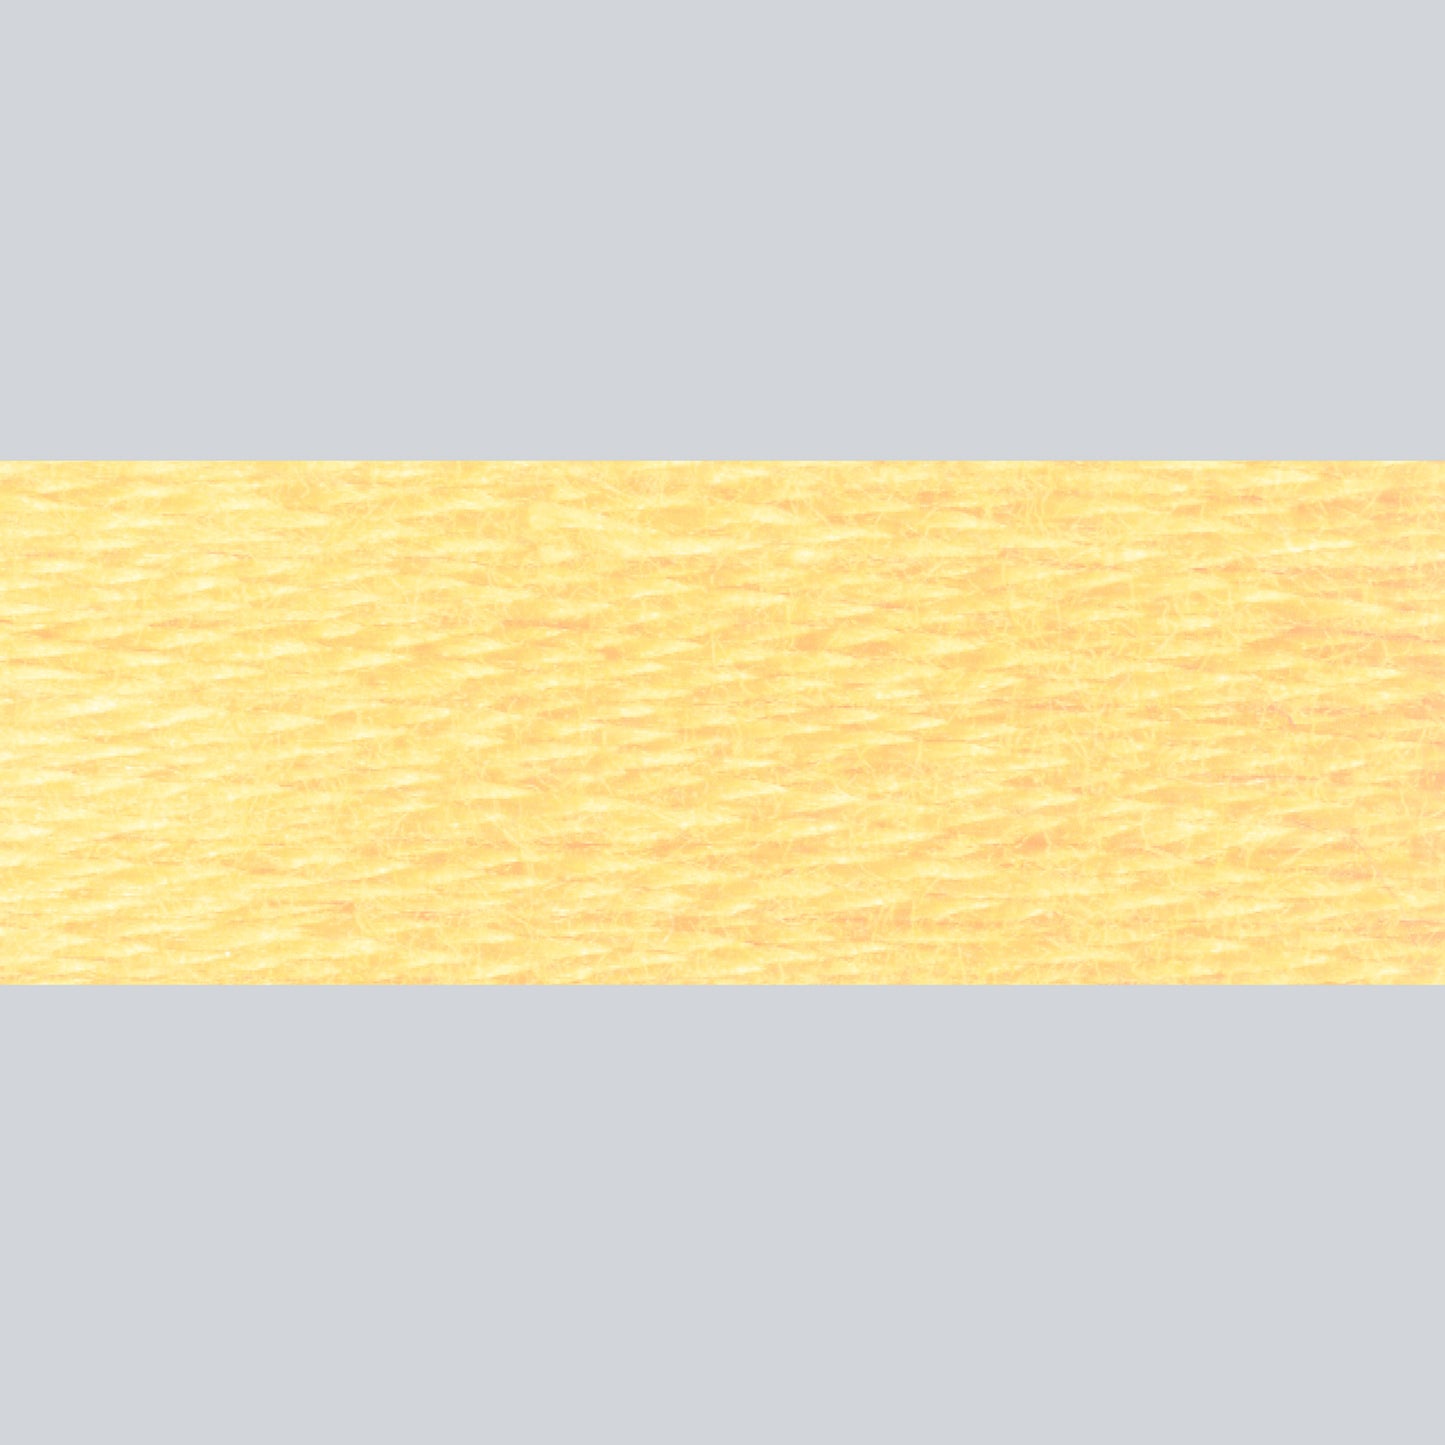 DMC Embroidery Floss - 744 Pale Yellow Alternative View #1